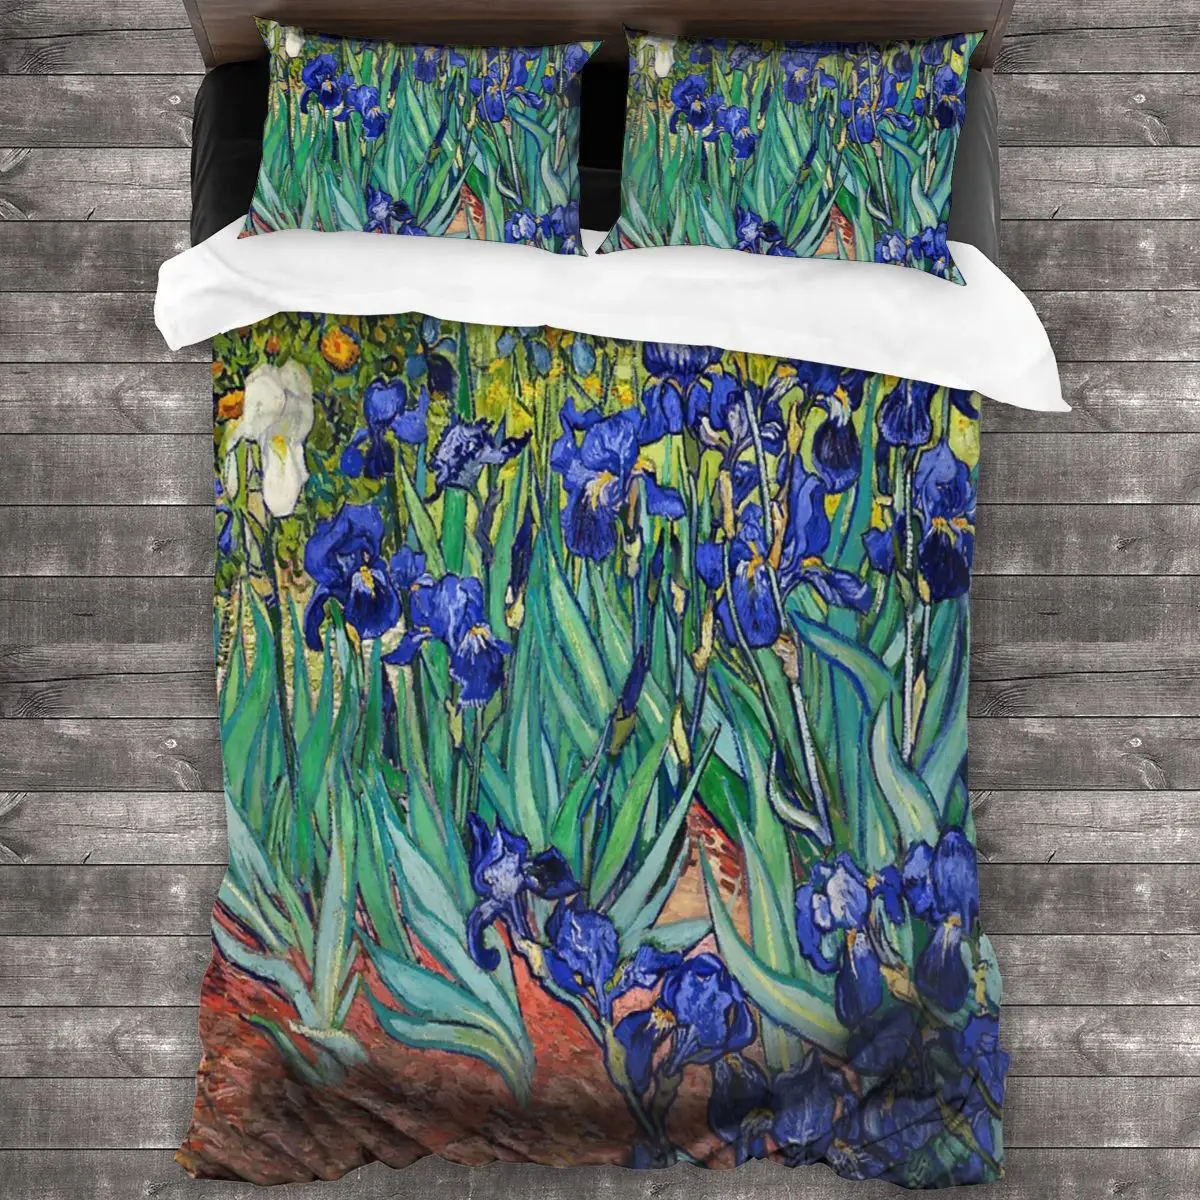 

Irises By Vincent Van Gogh Linens Bedspread Bedding Set Duvet Cover Bed Duvets Home Textiles Quilt And Bed Cover